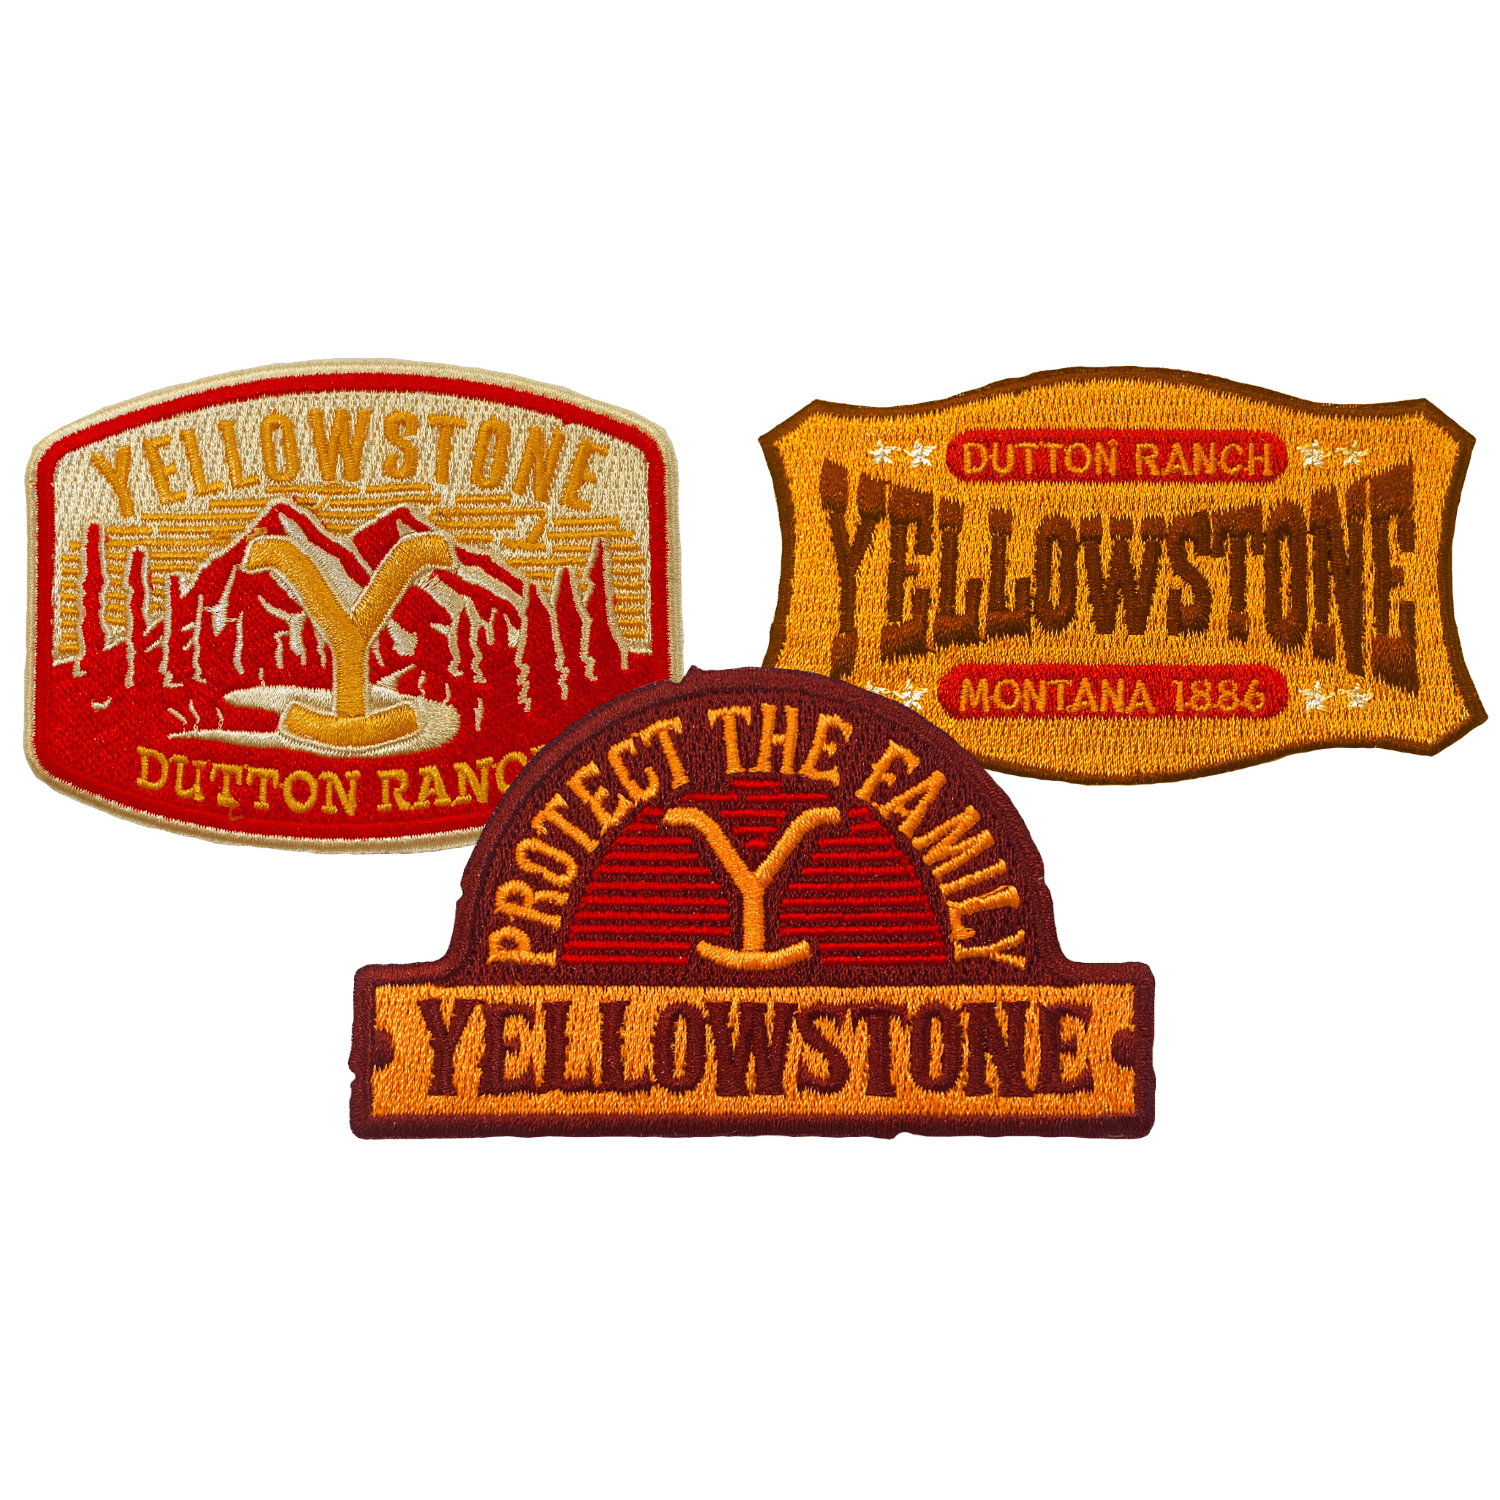 Yellowstone Dutton Ranch Iron On Patches - Pack of 3 - Paramount Shop